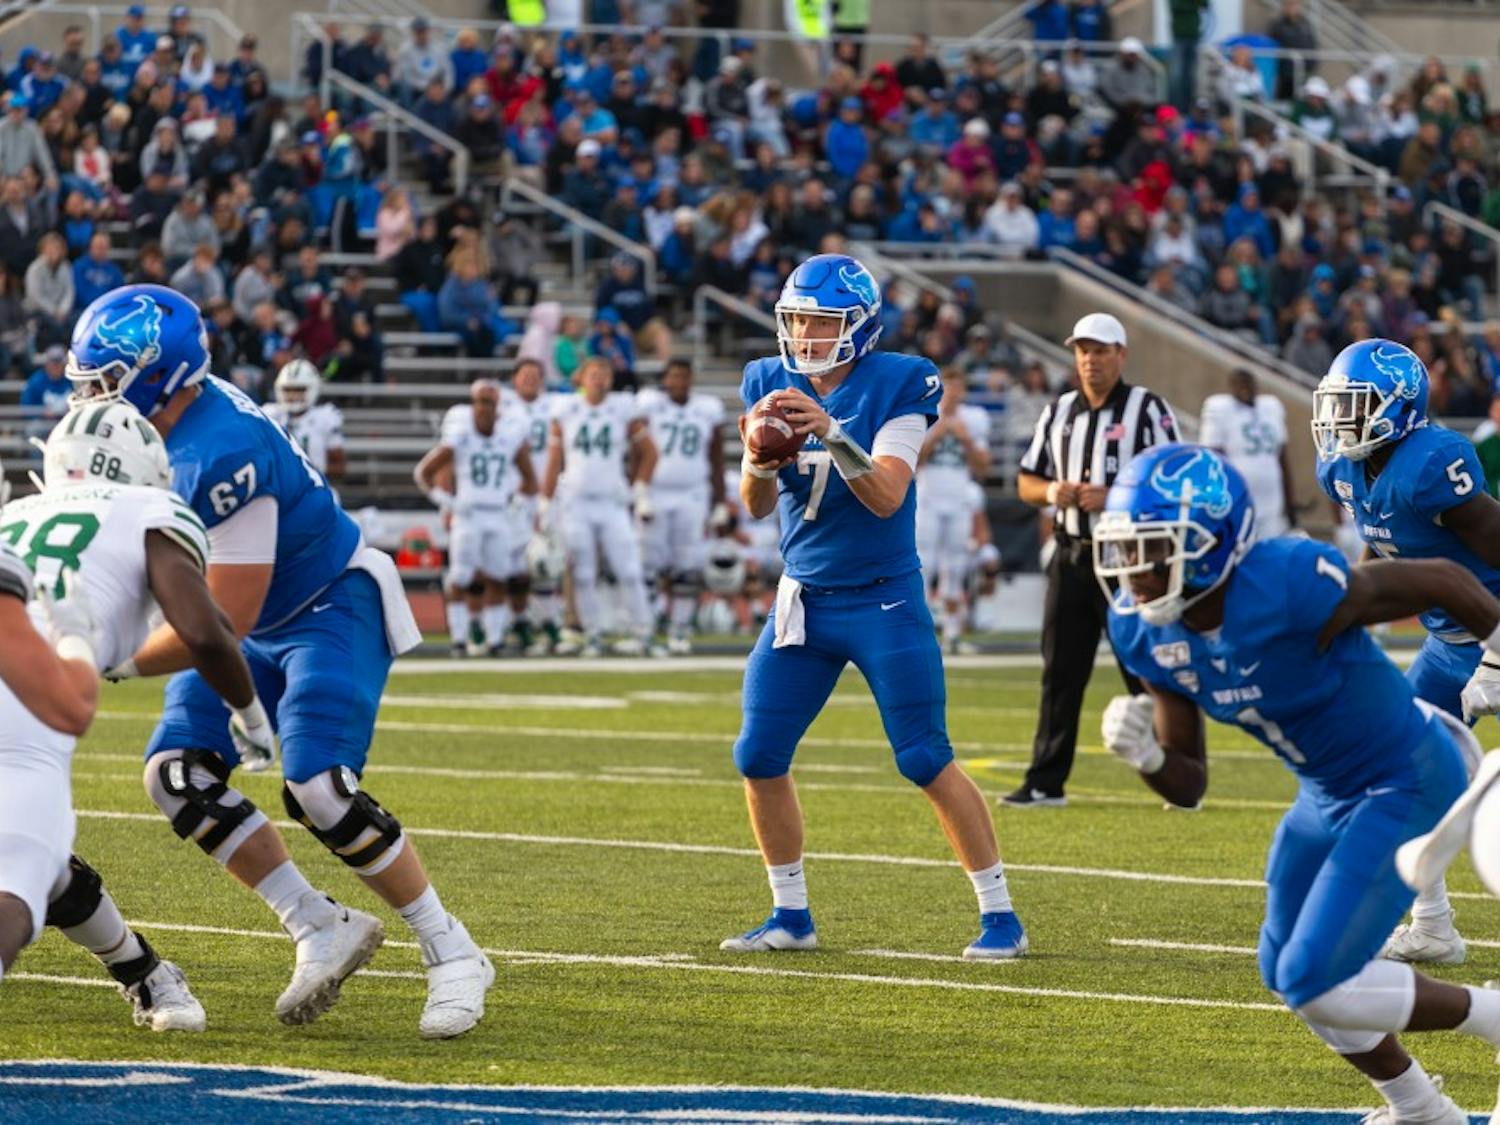 Quarterback Kyle Vantrease holds the ball against the Ohio Bobcats during the homecoming game at the UB Stadium on Saturday.